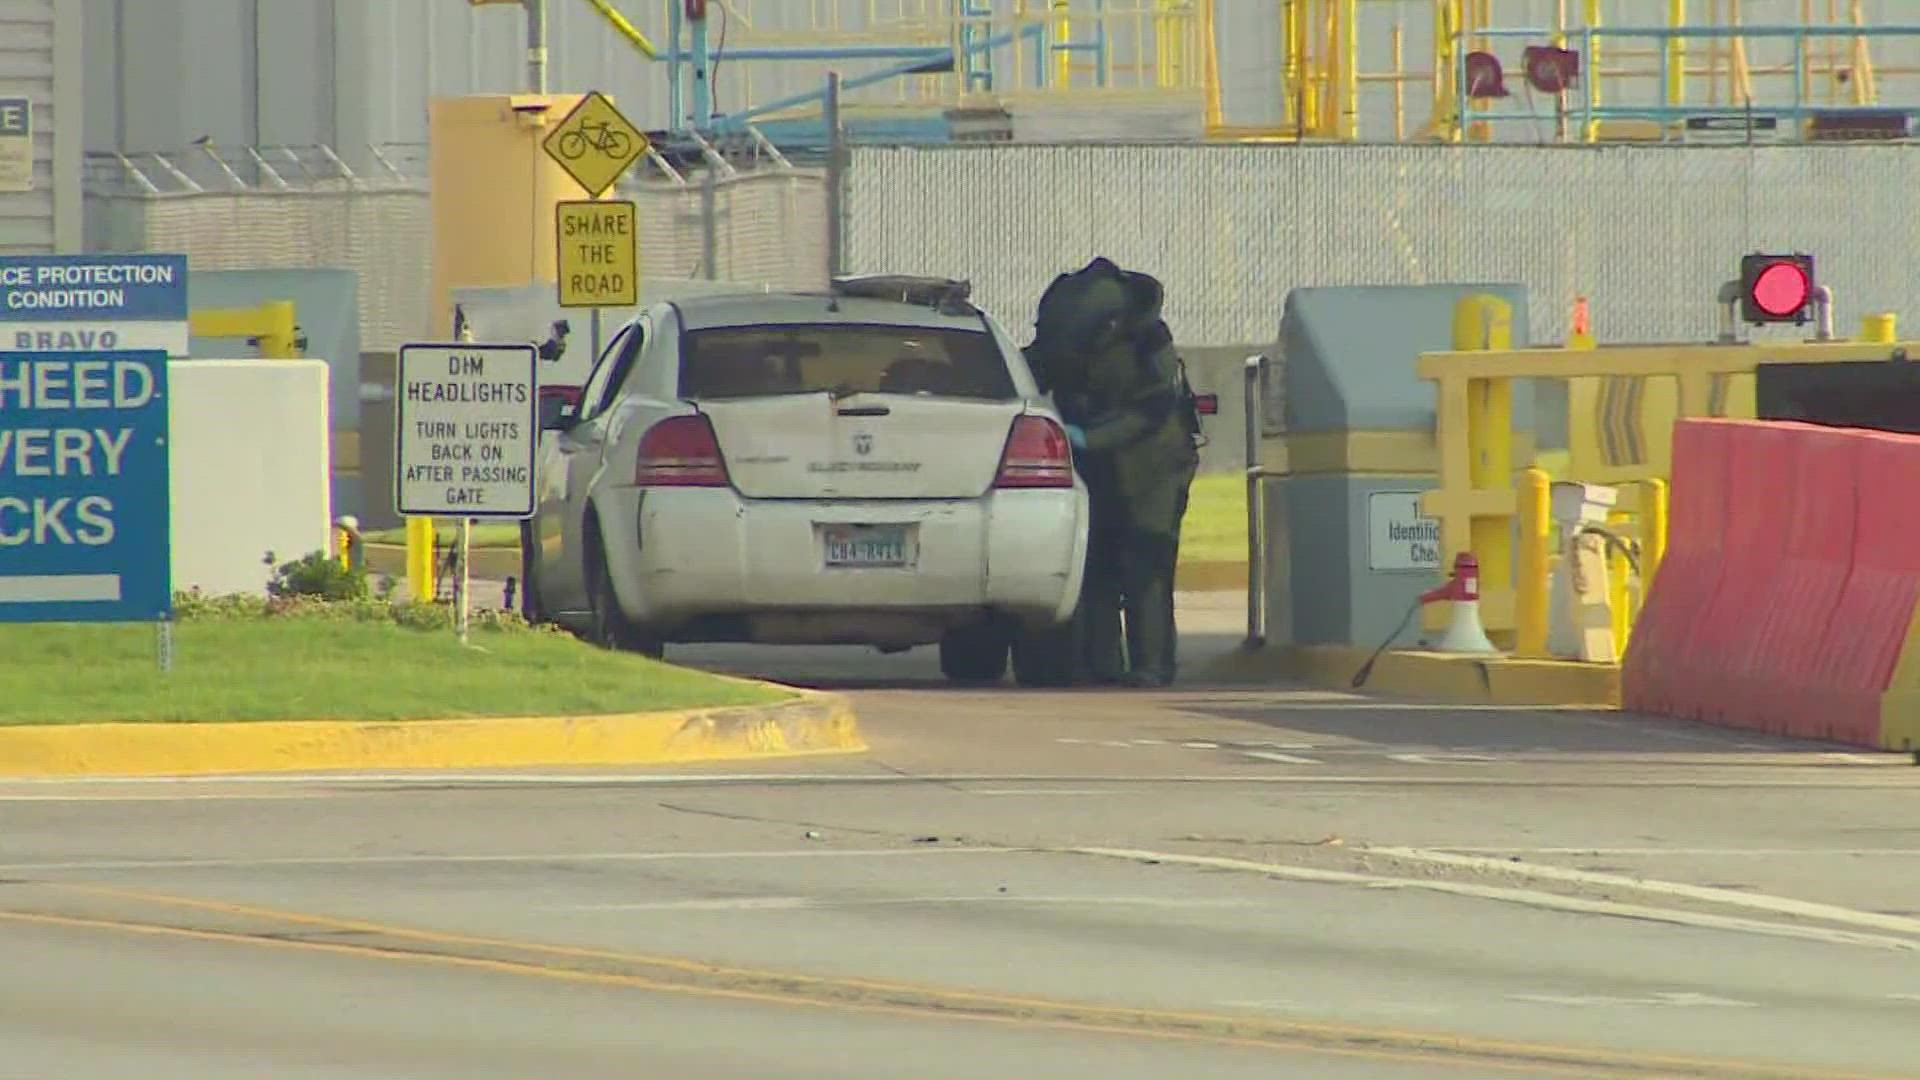 Police have been working to determine if there were any more threats after a deadly shooting at Lockheed Martin